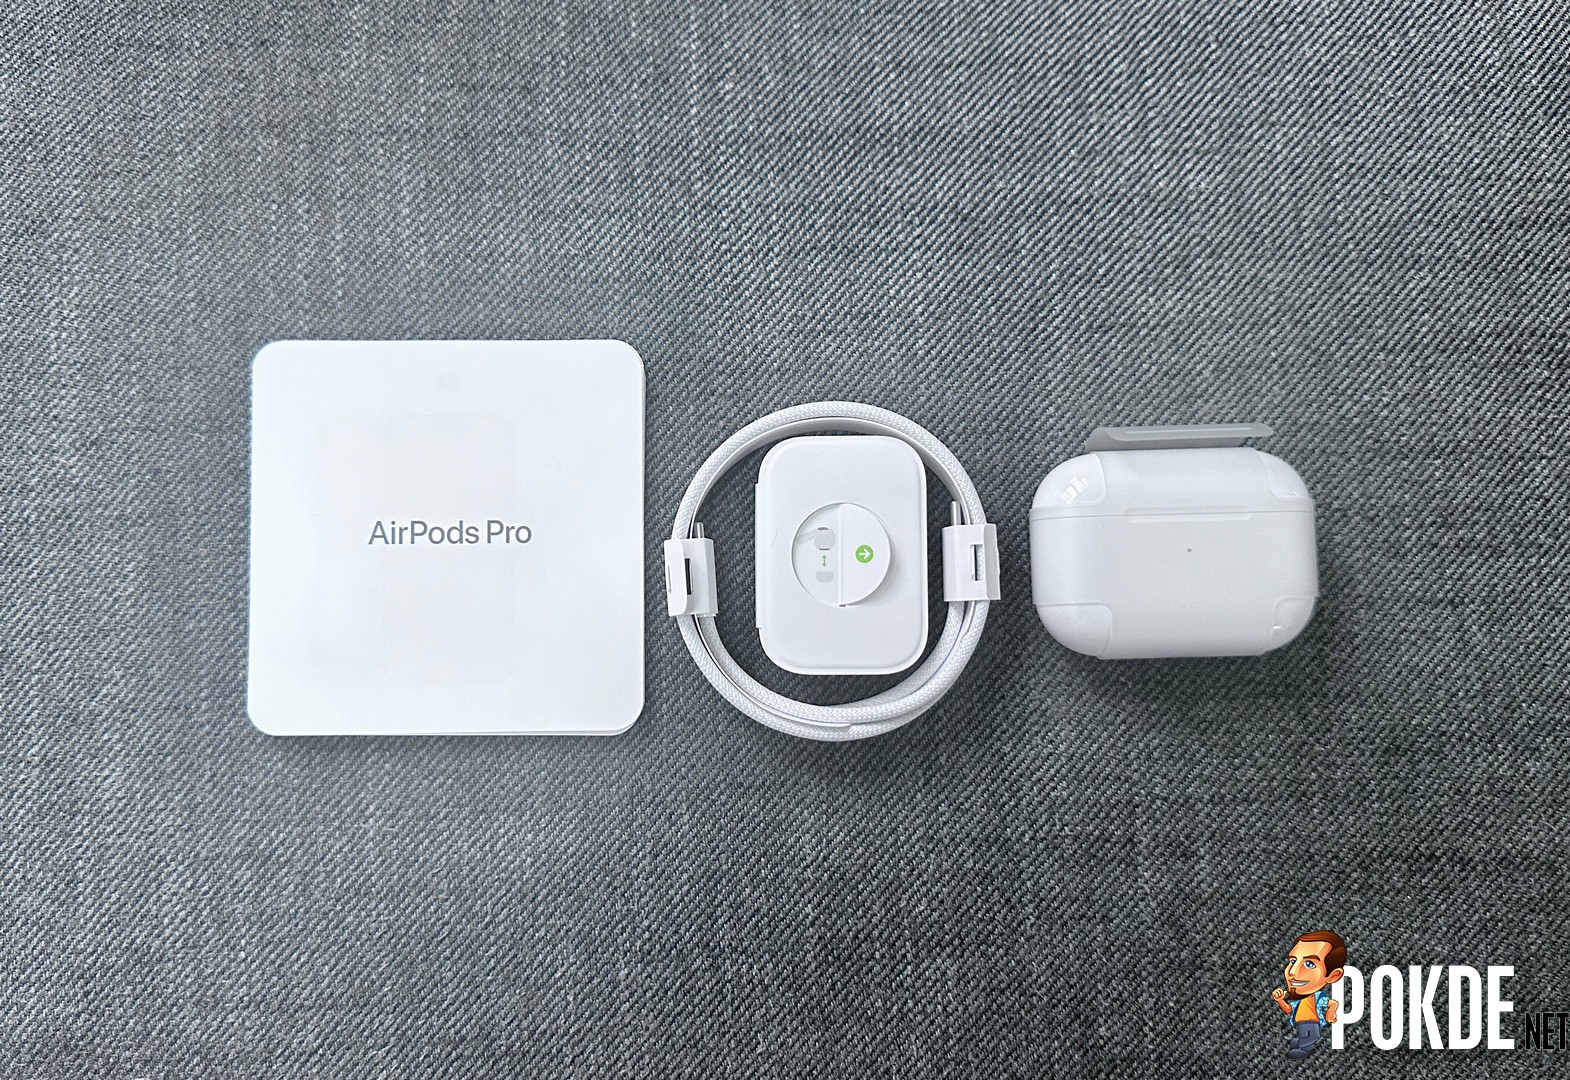 USB-C AirPods Pro 2 Unboxing and Overview 